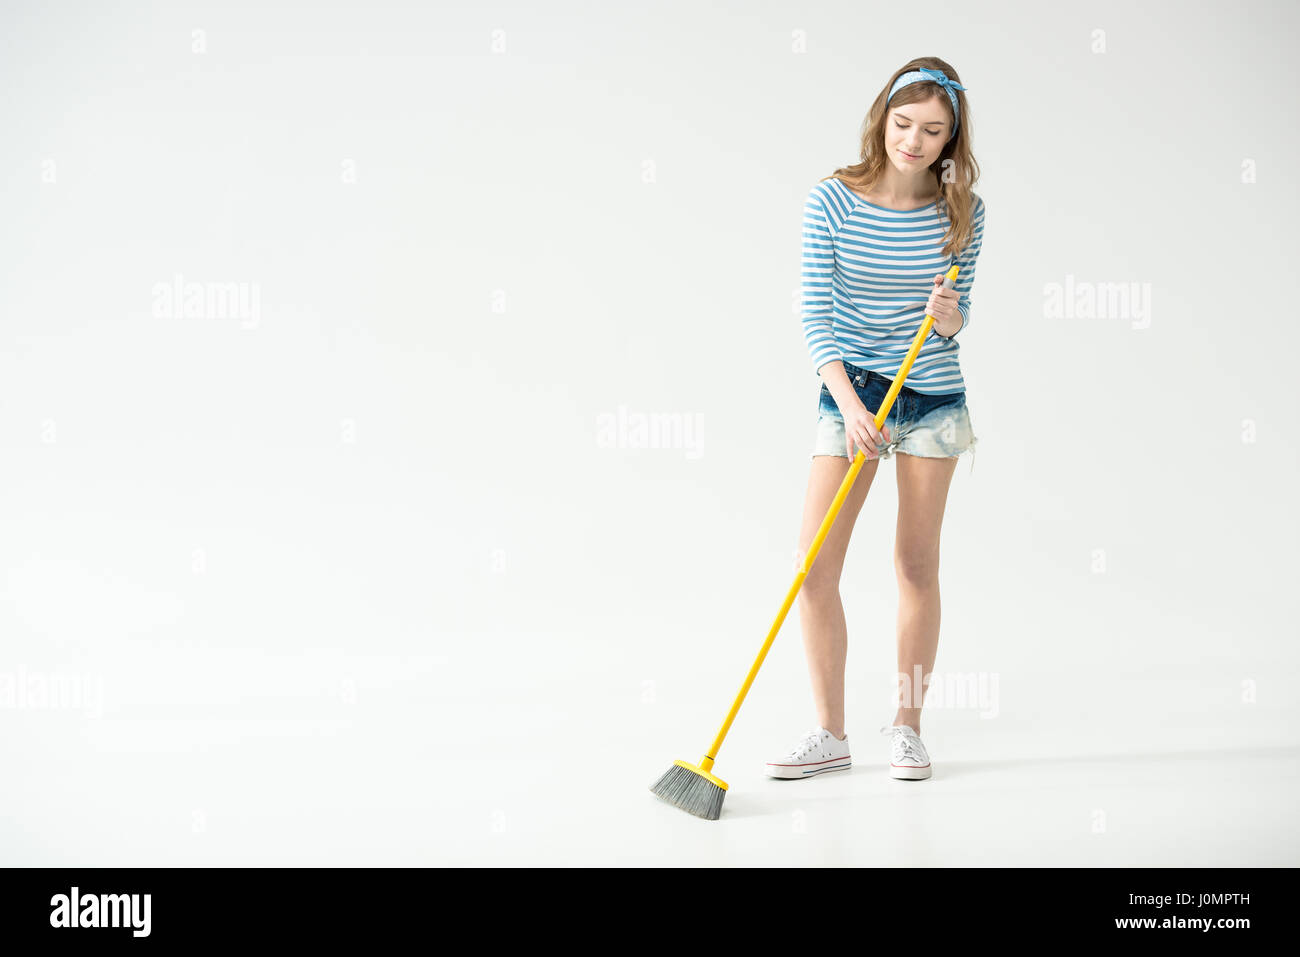 Beautiful young woman sweeping with broom on grey Stock Photo